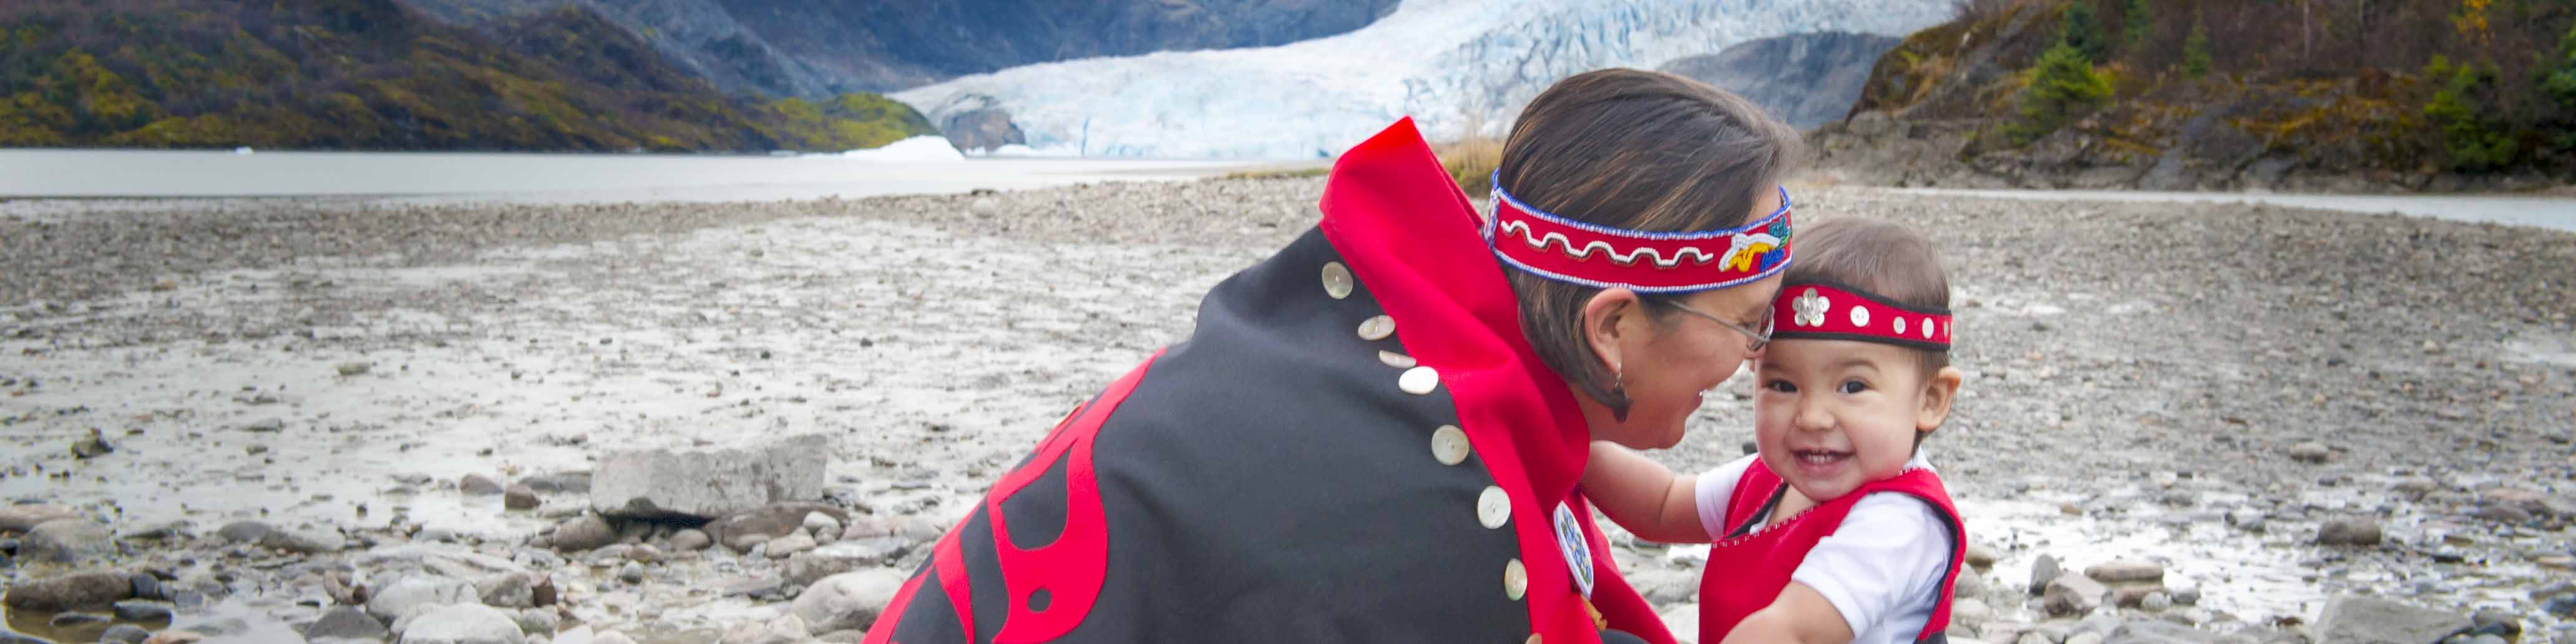 A woman in regalia kneels down face-to-face with a child at the Mendenhall Glacier